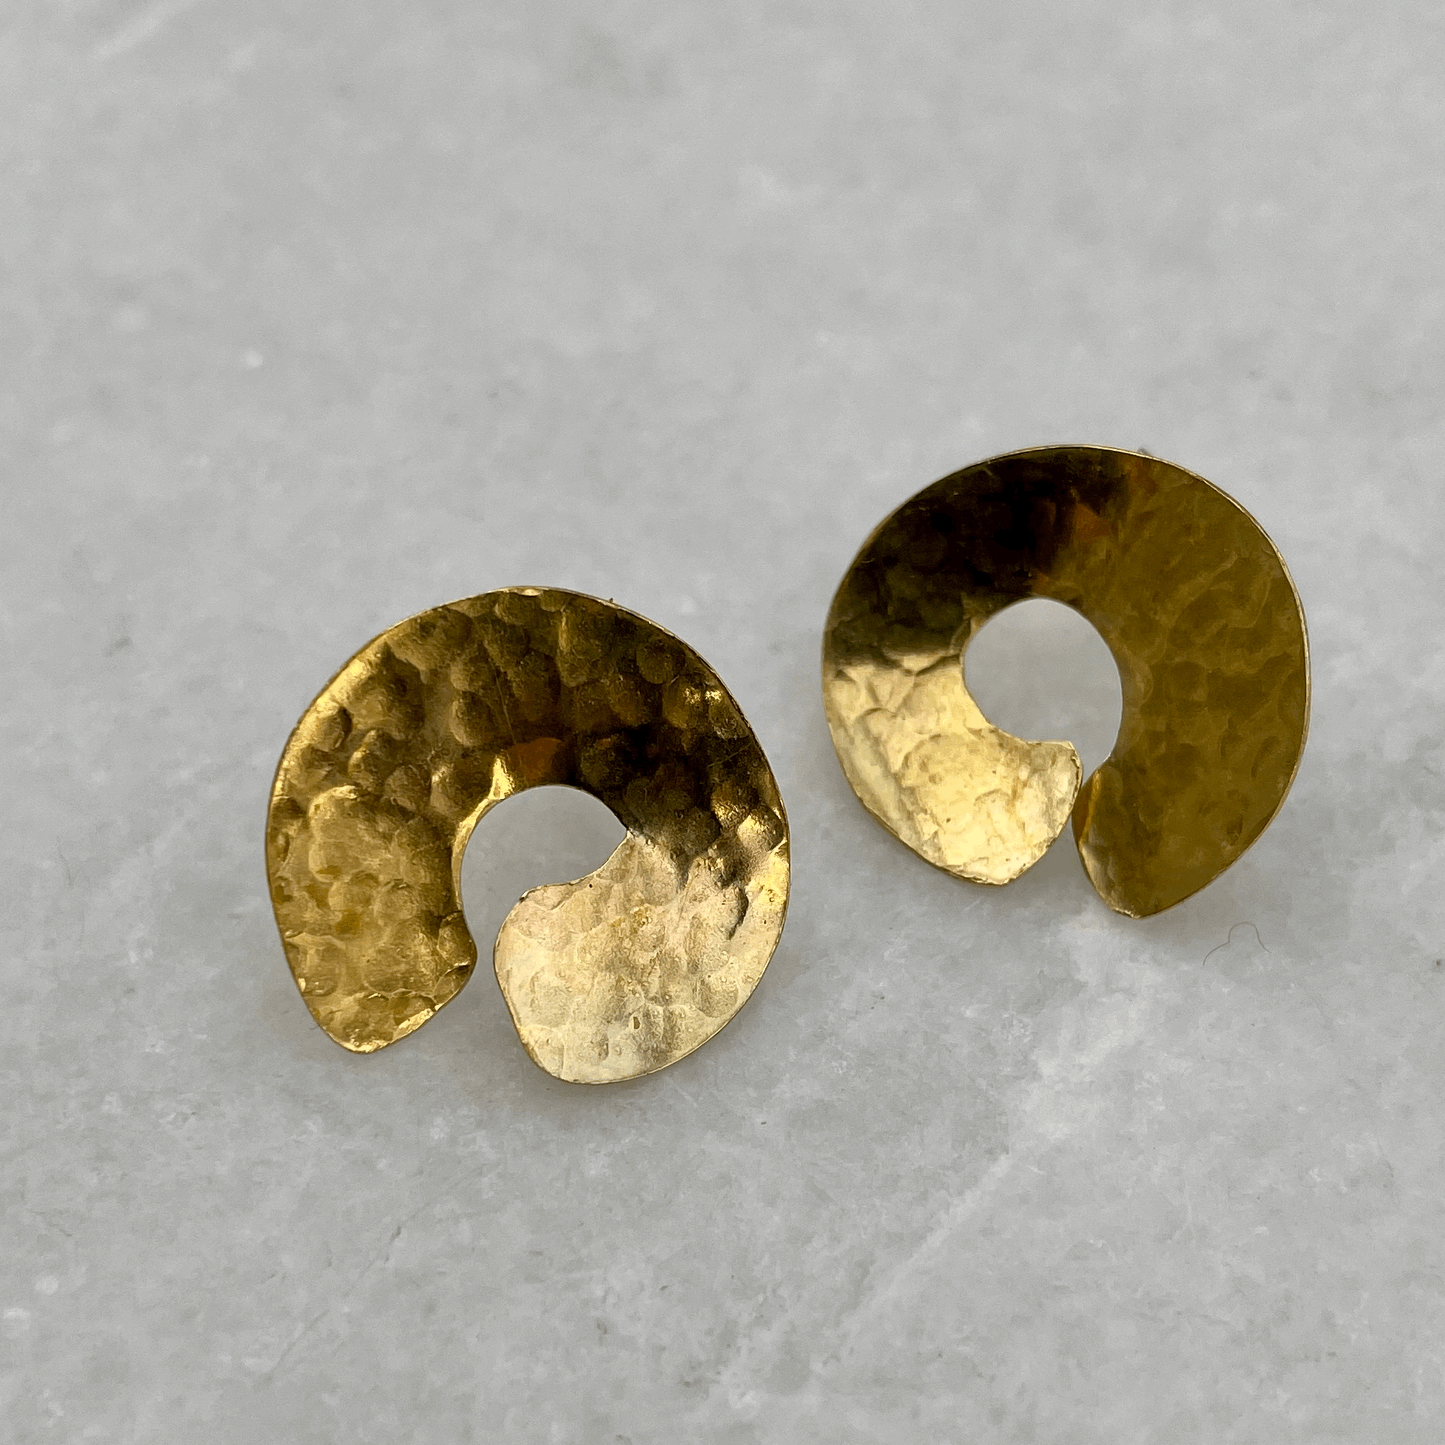 Codium Studs: handmade earrings in recycled brass, based on the shape of the ends of codium seaweed.